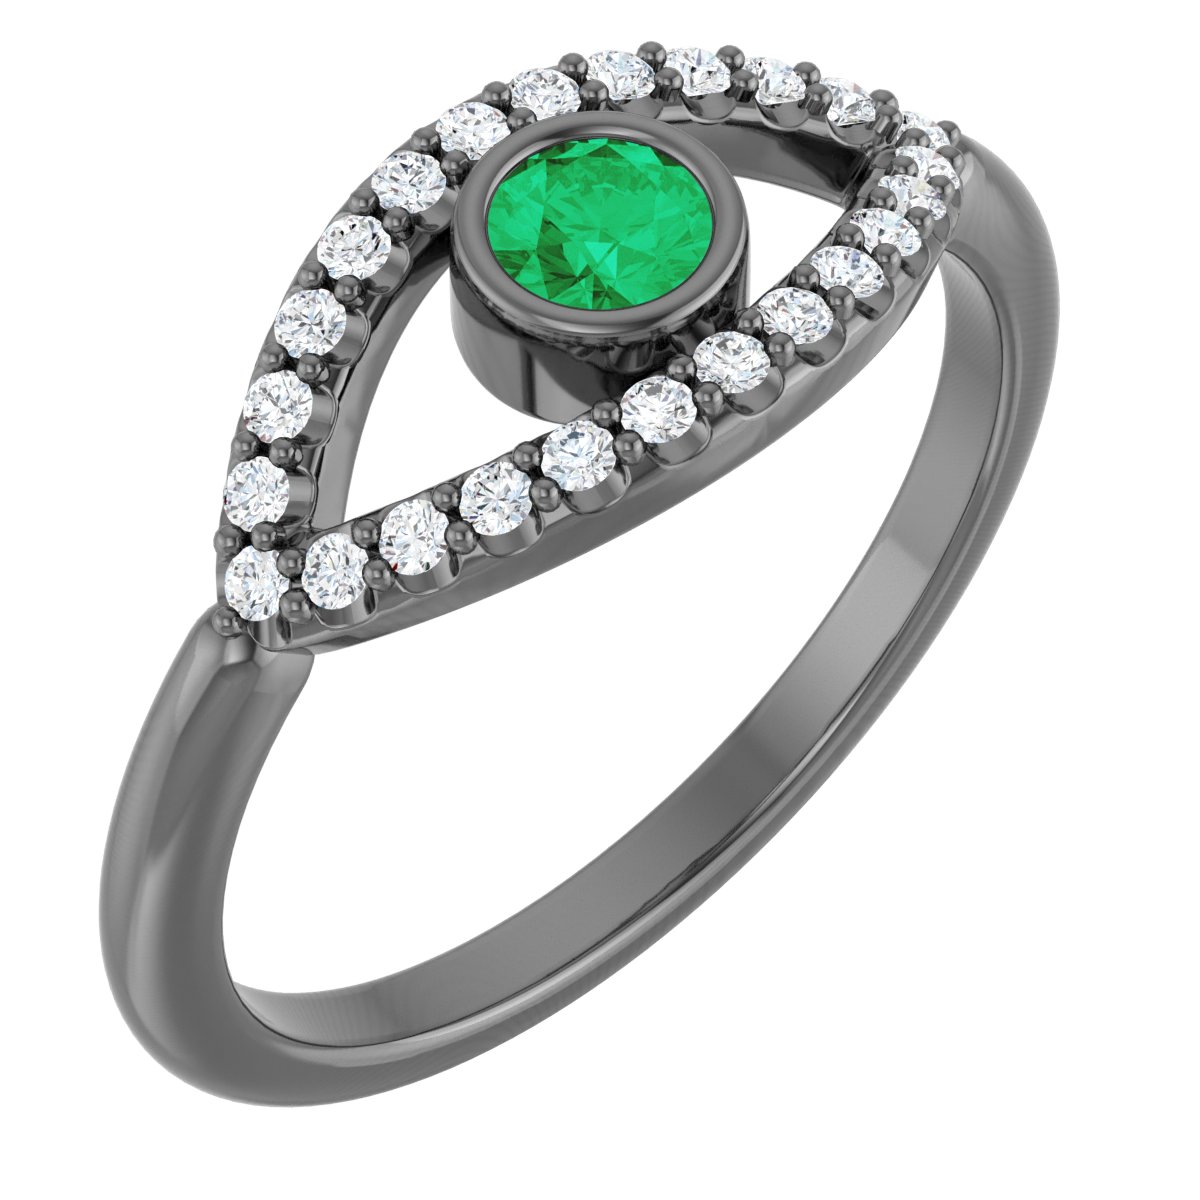 Sterling Silver Emerald and White Sapphire Evil Eye Ring Ref 15153705